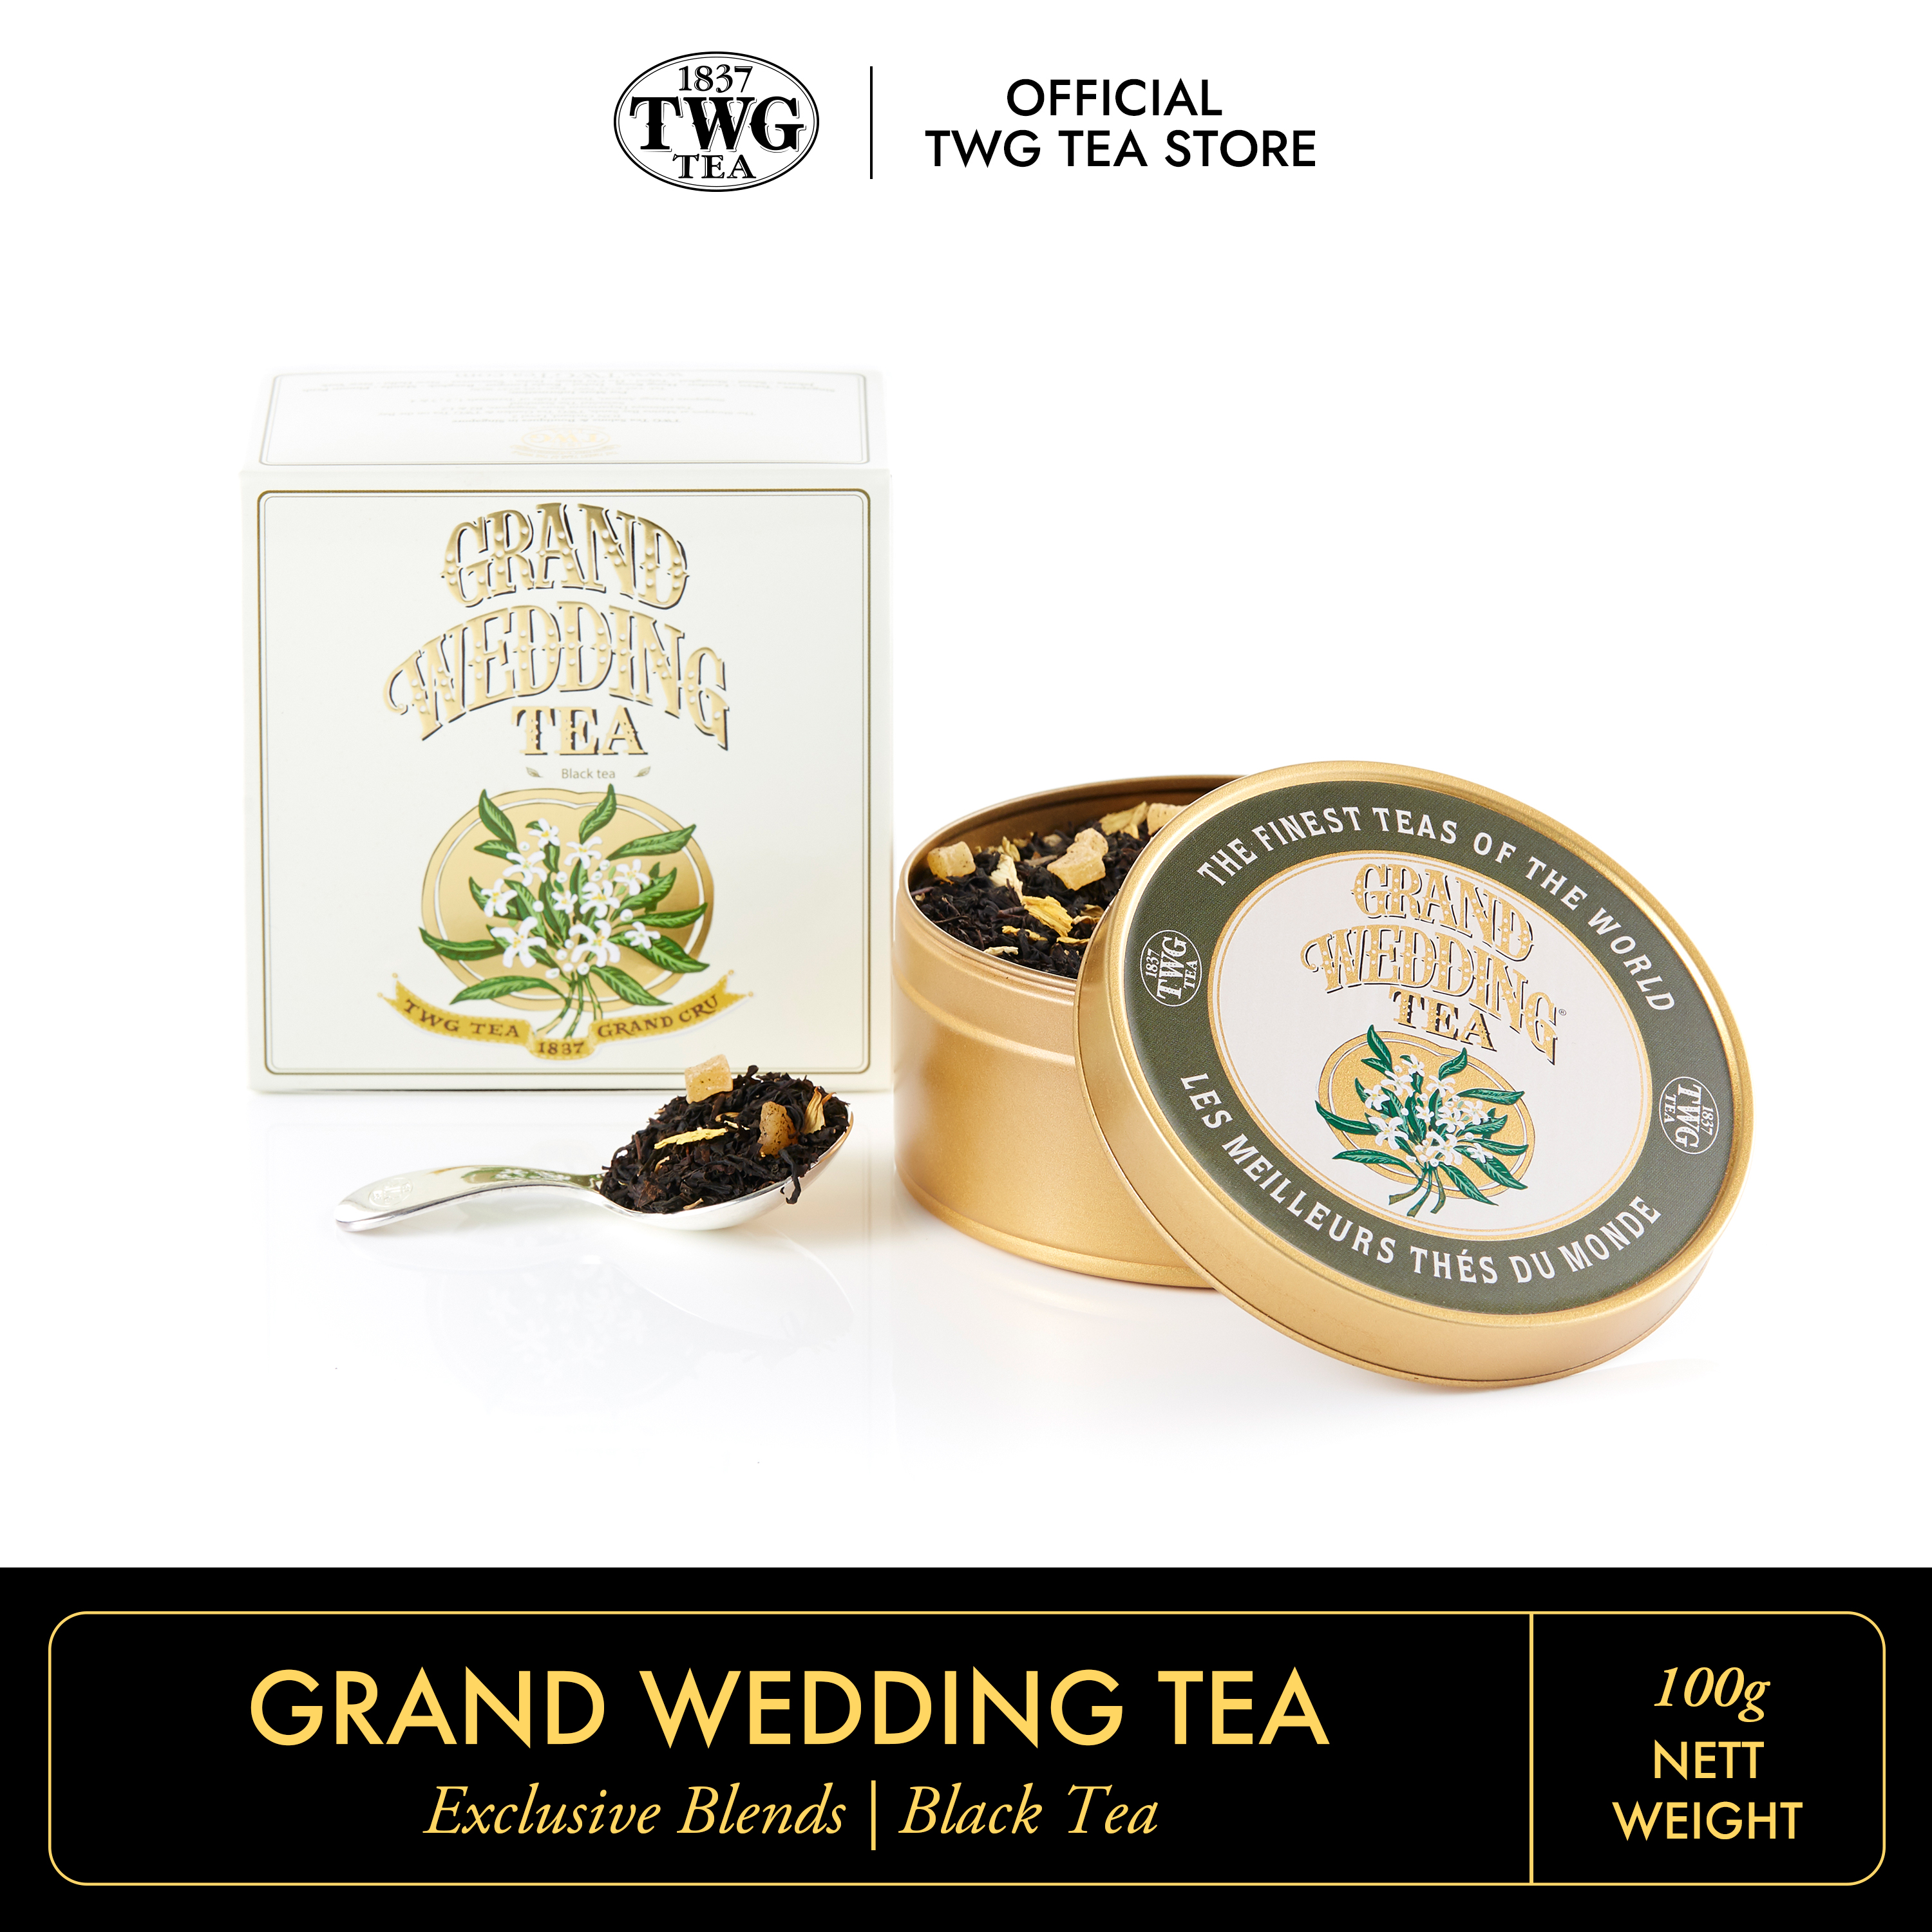 TWG Tea (@twgteaofficial) • Instagram photos and videos